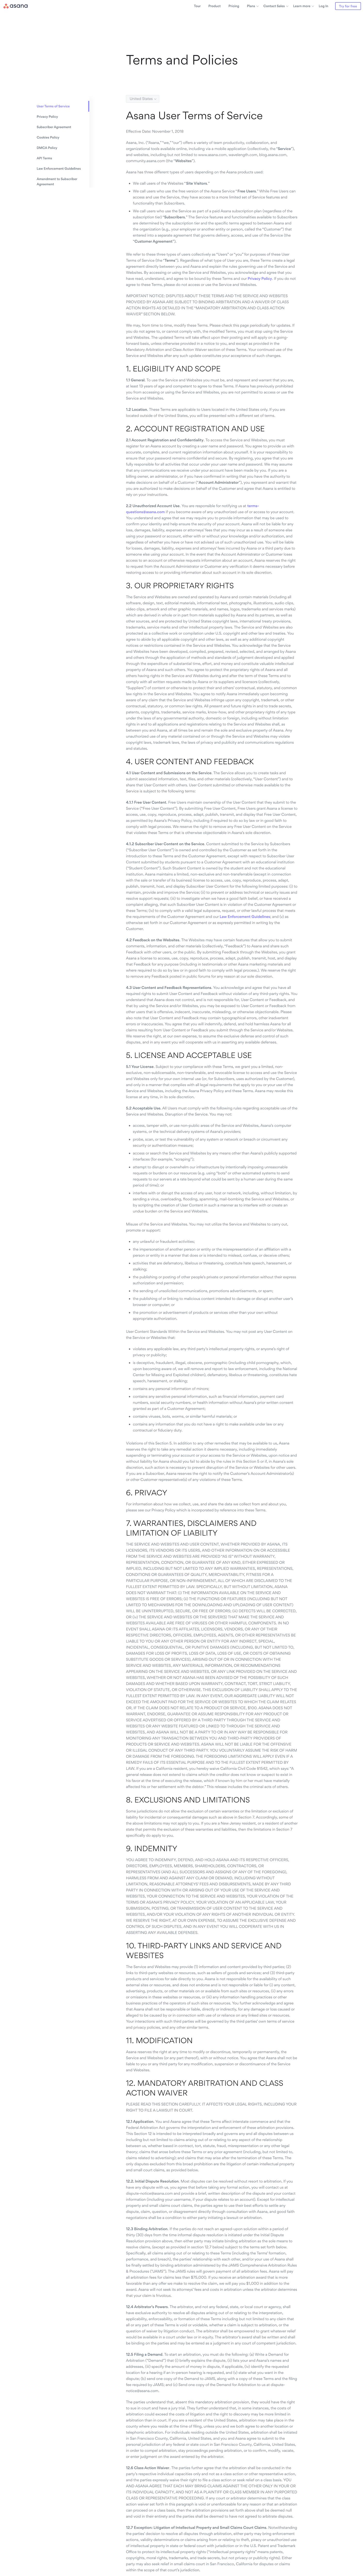 Screenshot of the Terms and Policies page from the Asana website.